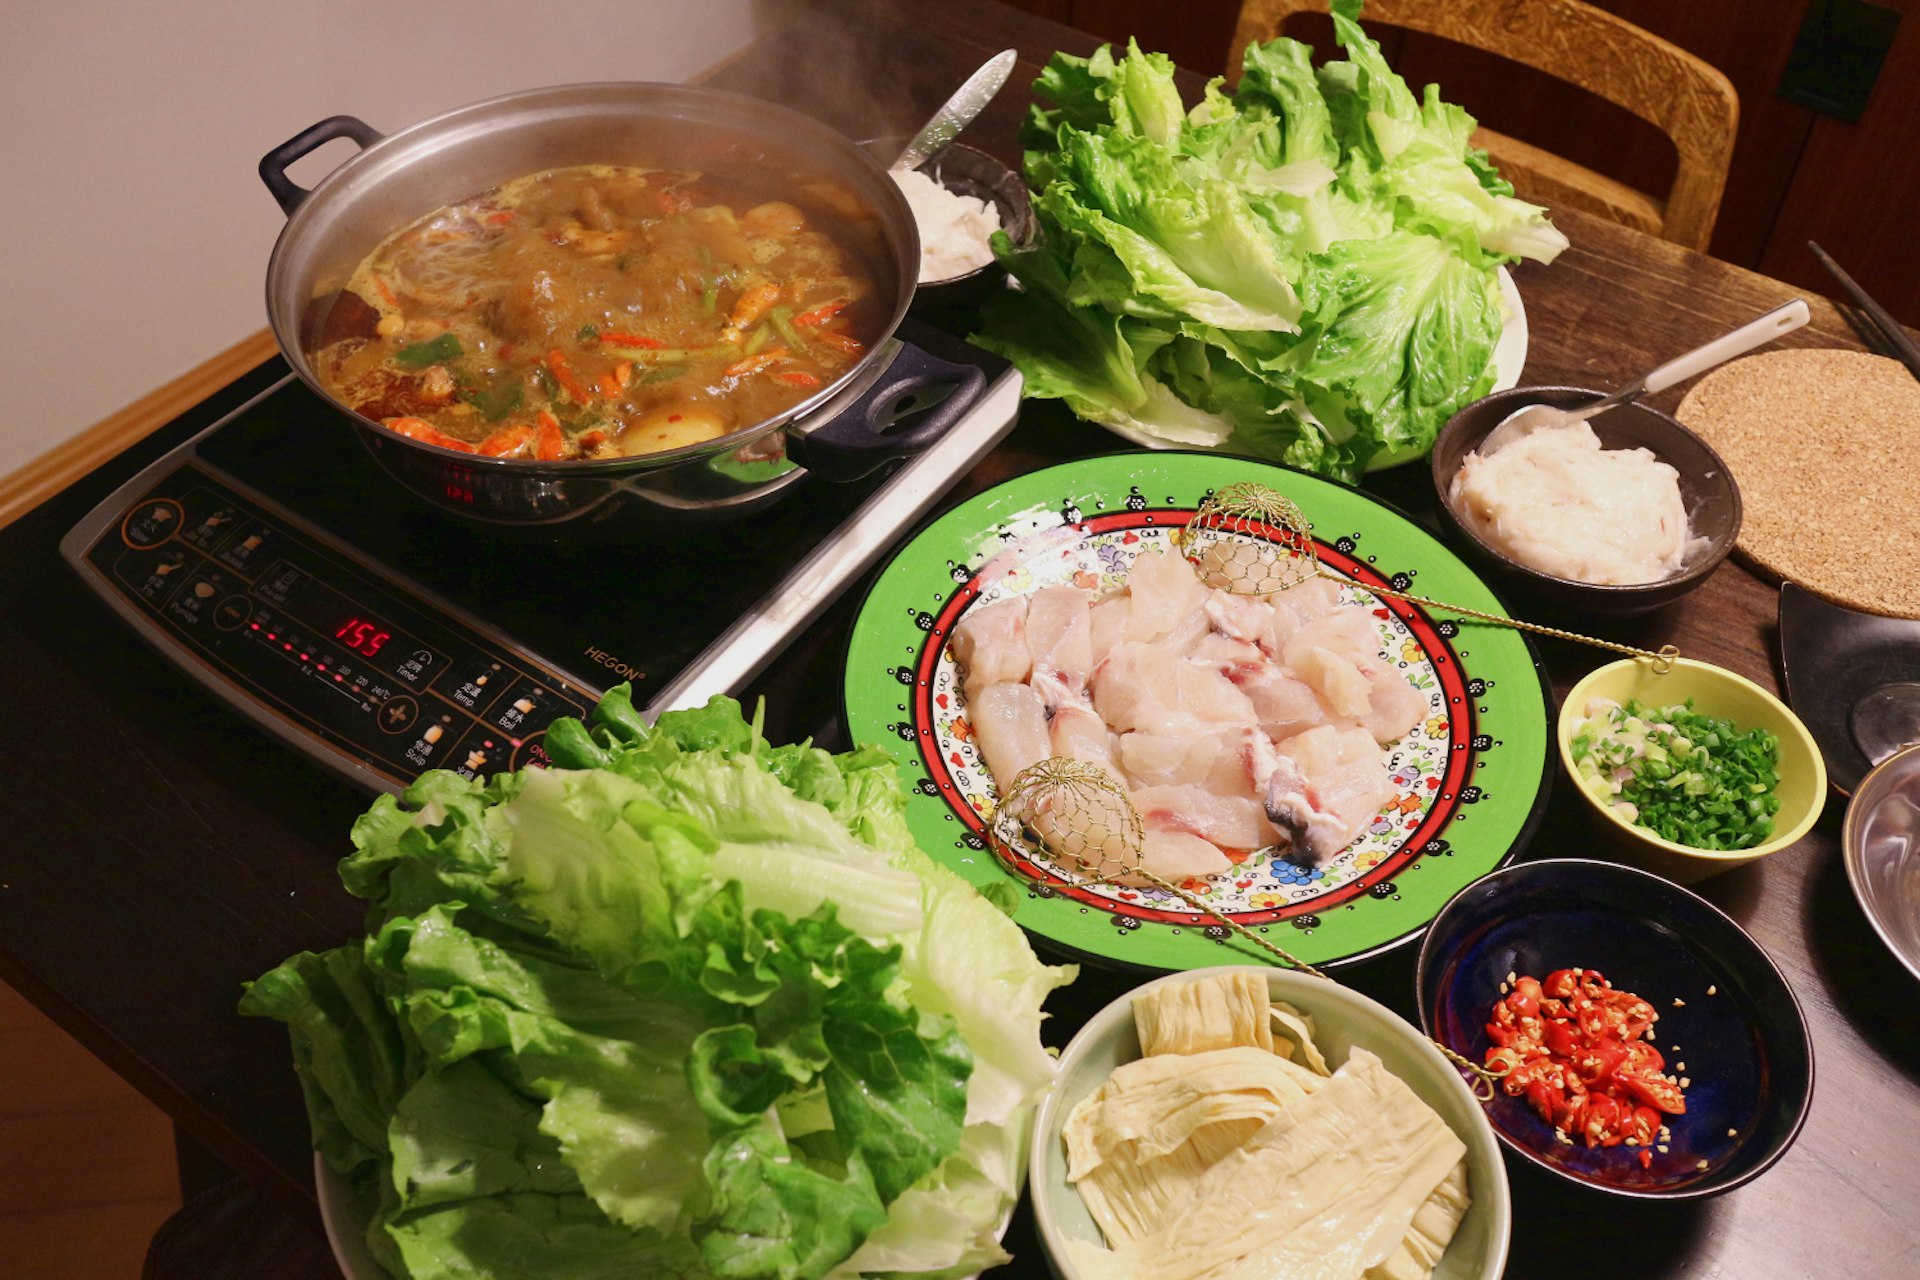 Spicy hotpot with all the condiments. Image by Piera Chen / Lonely Planet